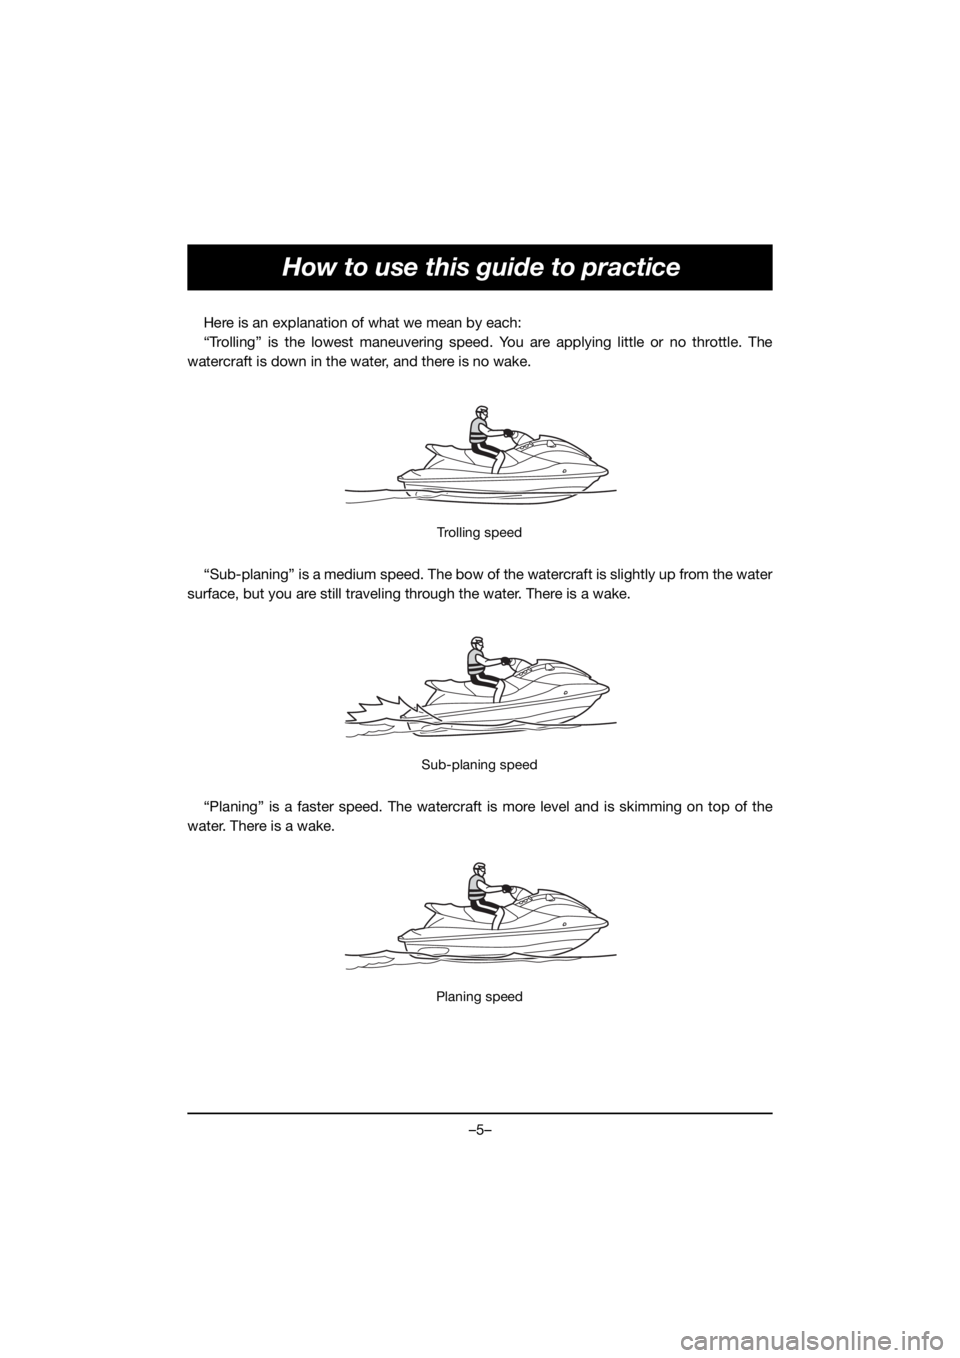 YAMAHA VX LIMITED HO 2021  Manual de utilização (in Portuguese) –5–
How to use this guide to practice
Here is an explanation of what we mean by each:
“Trolling” is the lowest maneuvering speed. You are applying little or no throttle. The
watercraft is down